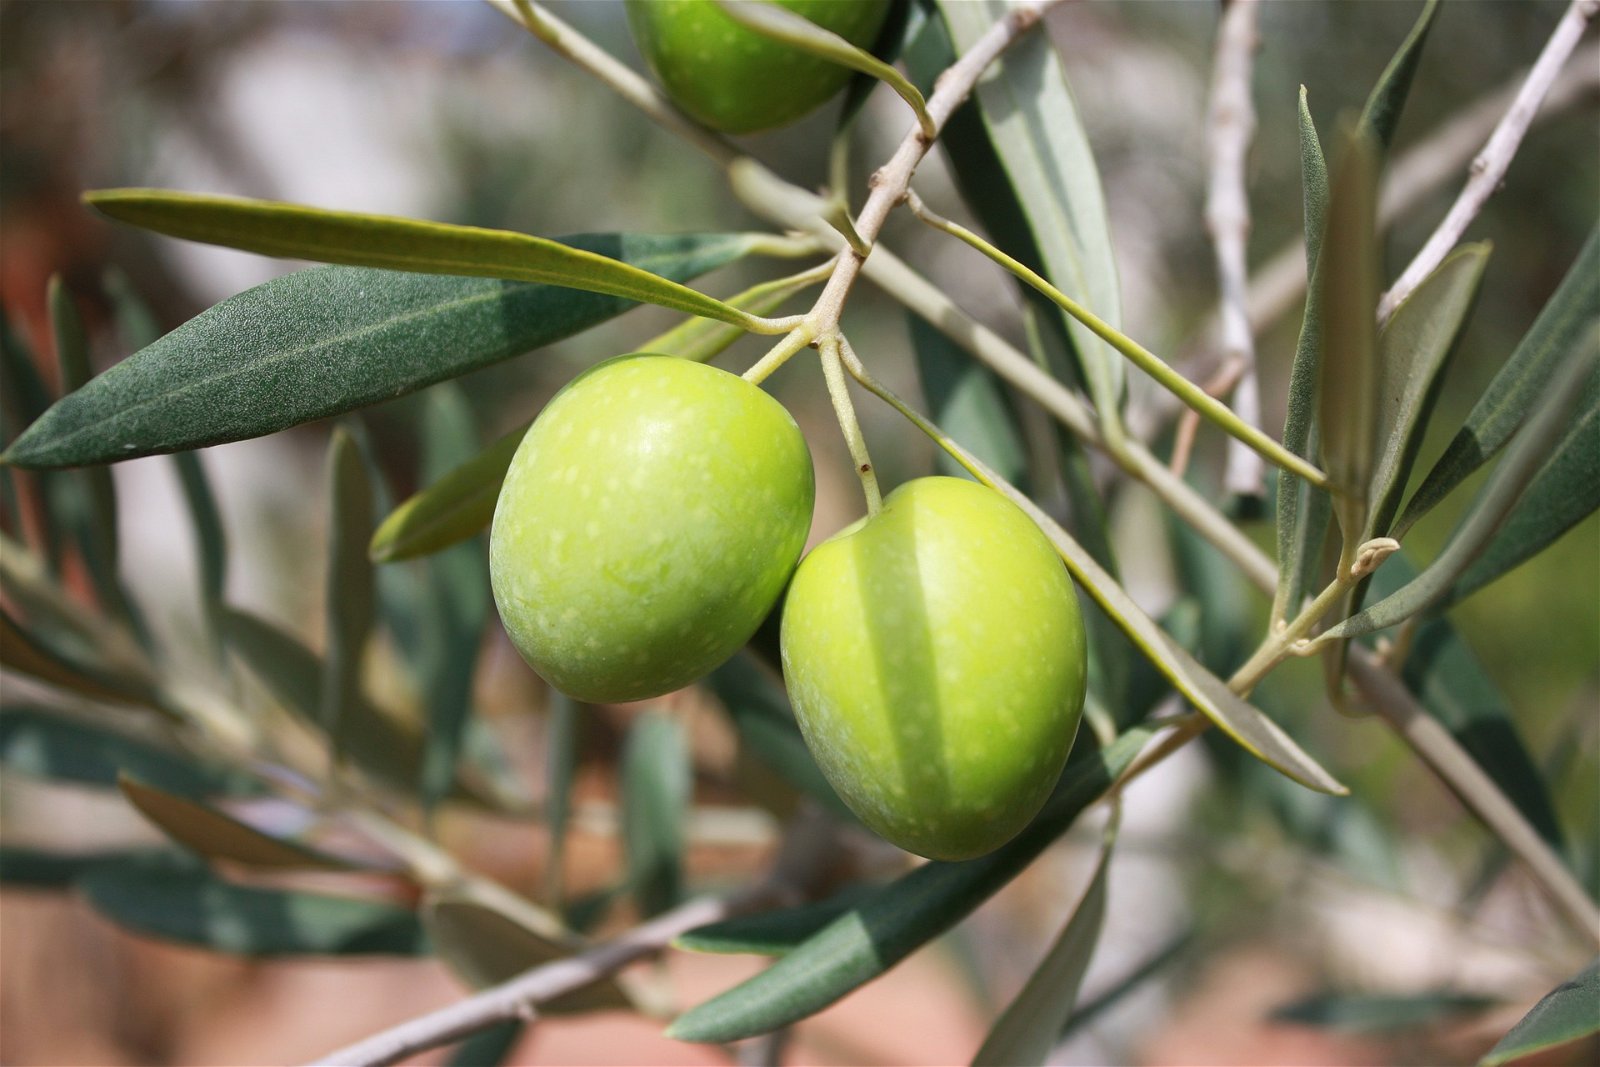 Victor Feguer hoped his last meal, a single olive, would become a symbol of peace.